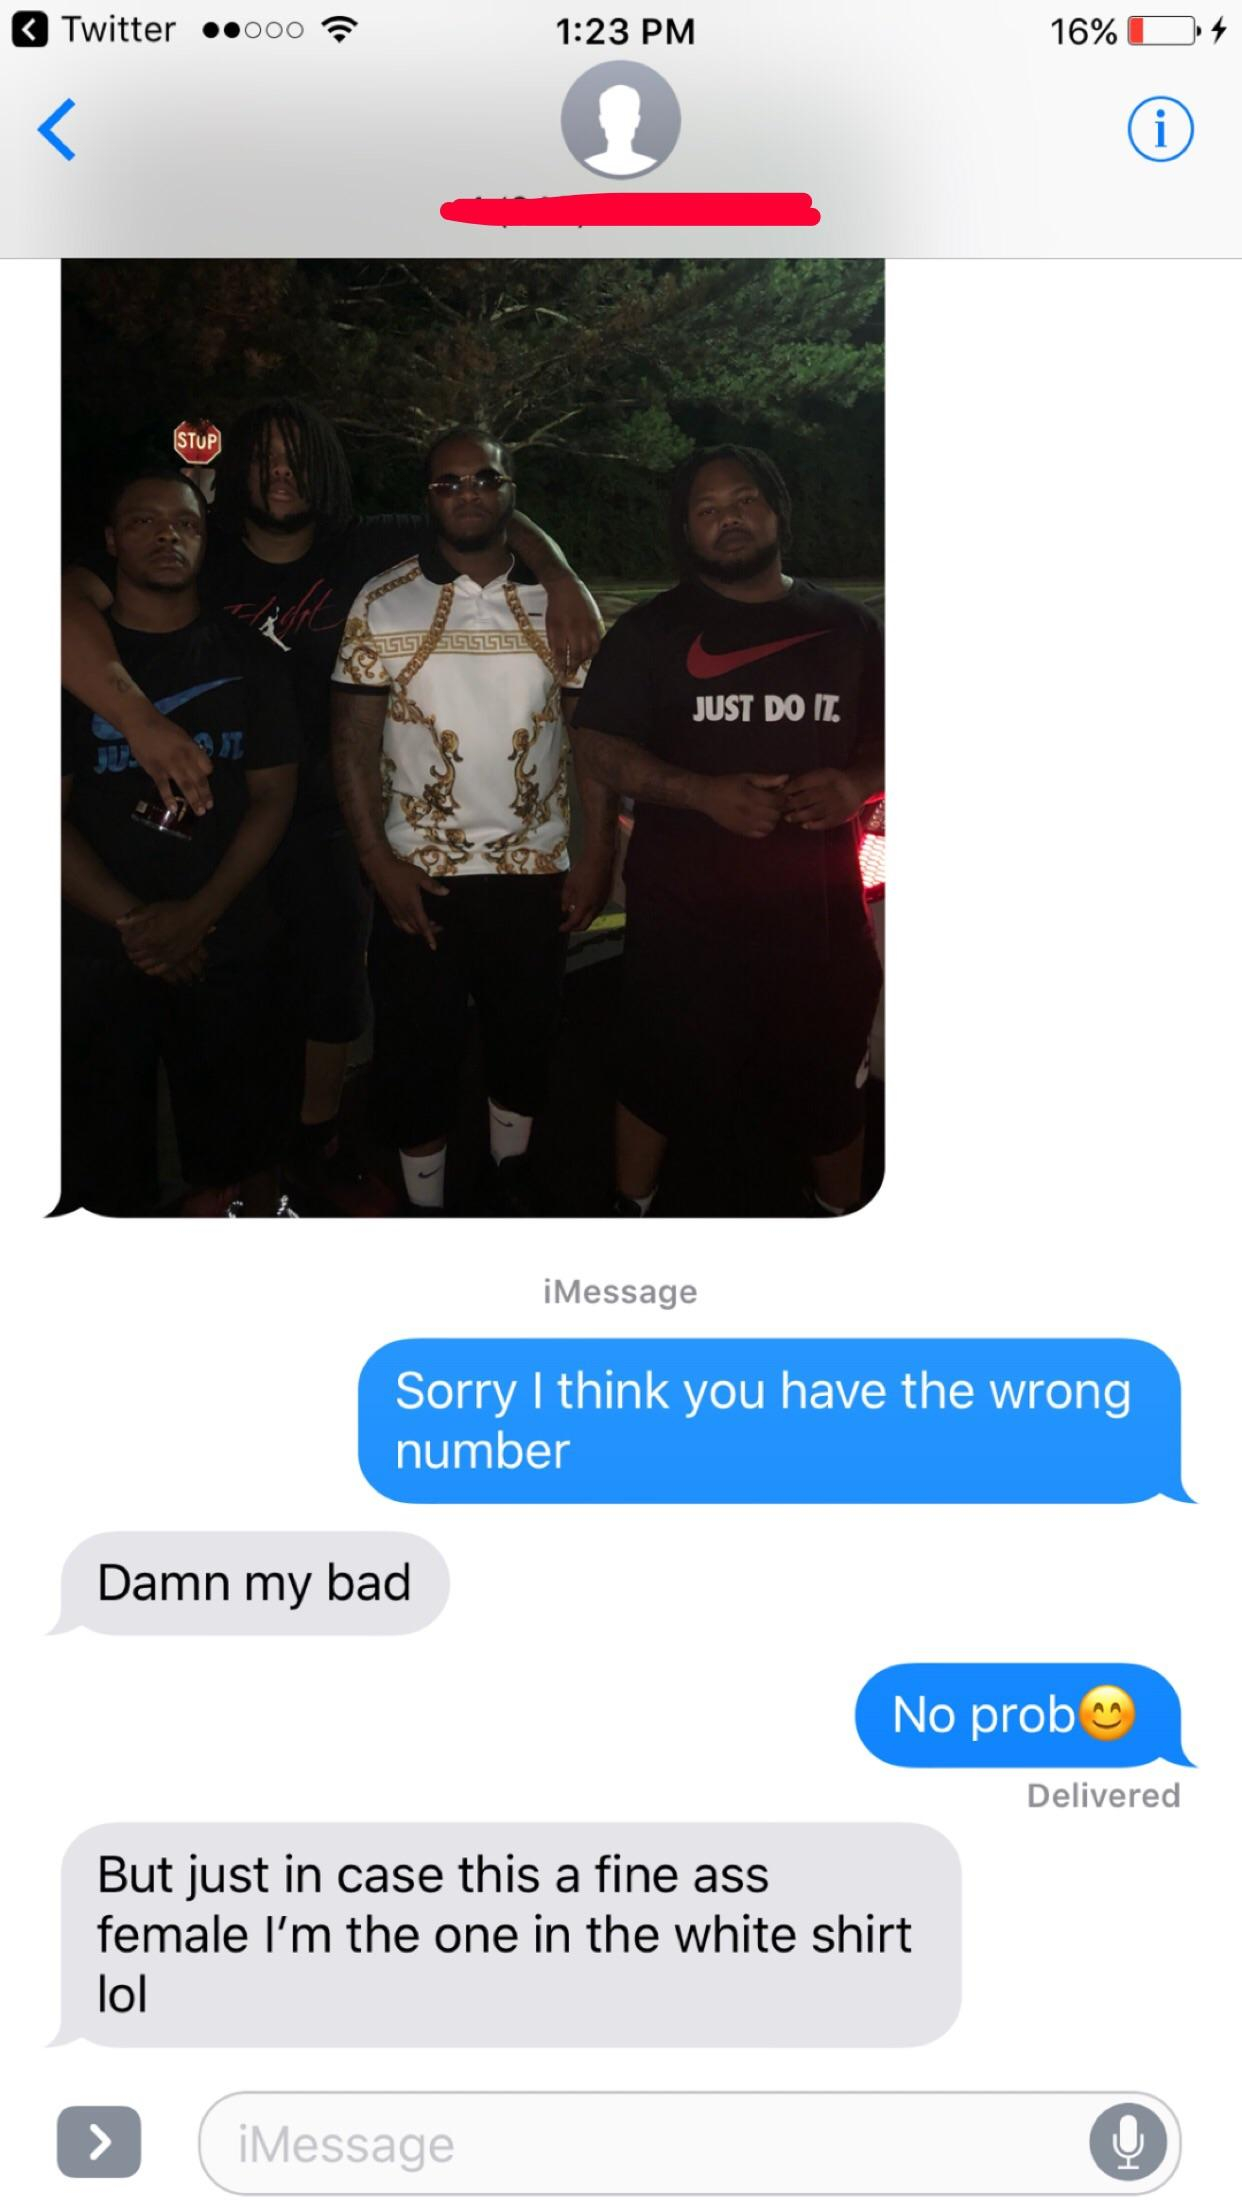 make a conversation interesting - Twitter . 16% Just Doe Message Sorry I think you have the wrong number Damn my bad No prob Delivered But just in case this a fine ass female I'm the one in the white shirt lol > Message